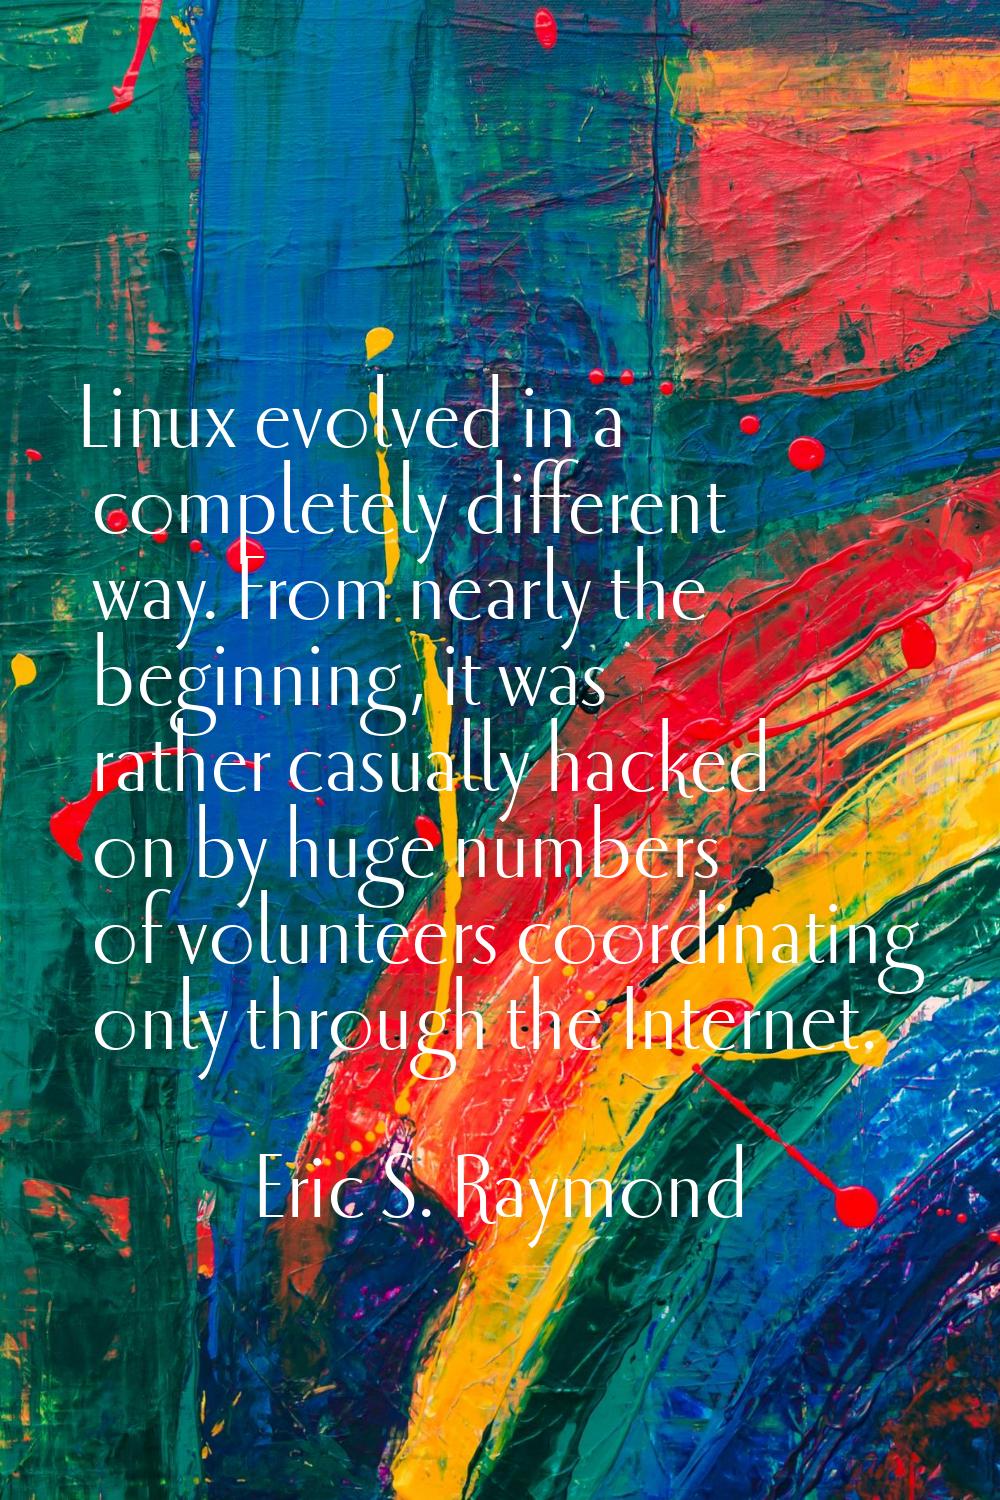 Linux evolved in a completely different way. From nearly the beginning, it was rather casually hack